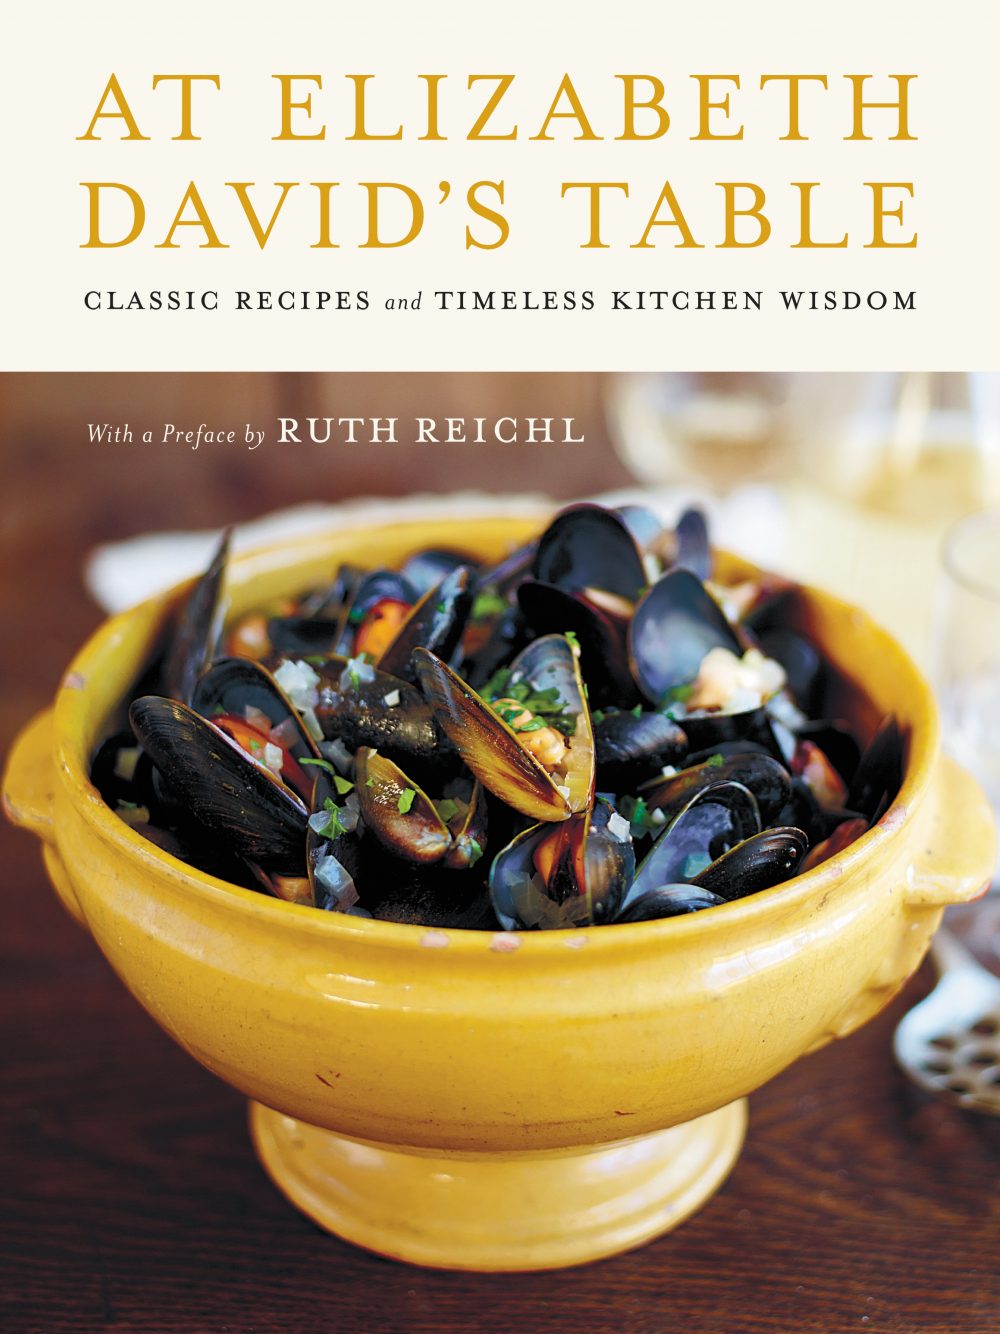 At Elizabeth David’s Table: Classic Recipes and Timeless Kitchen Wisdom